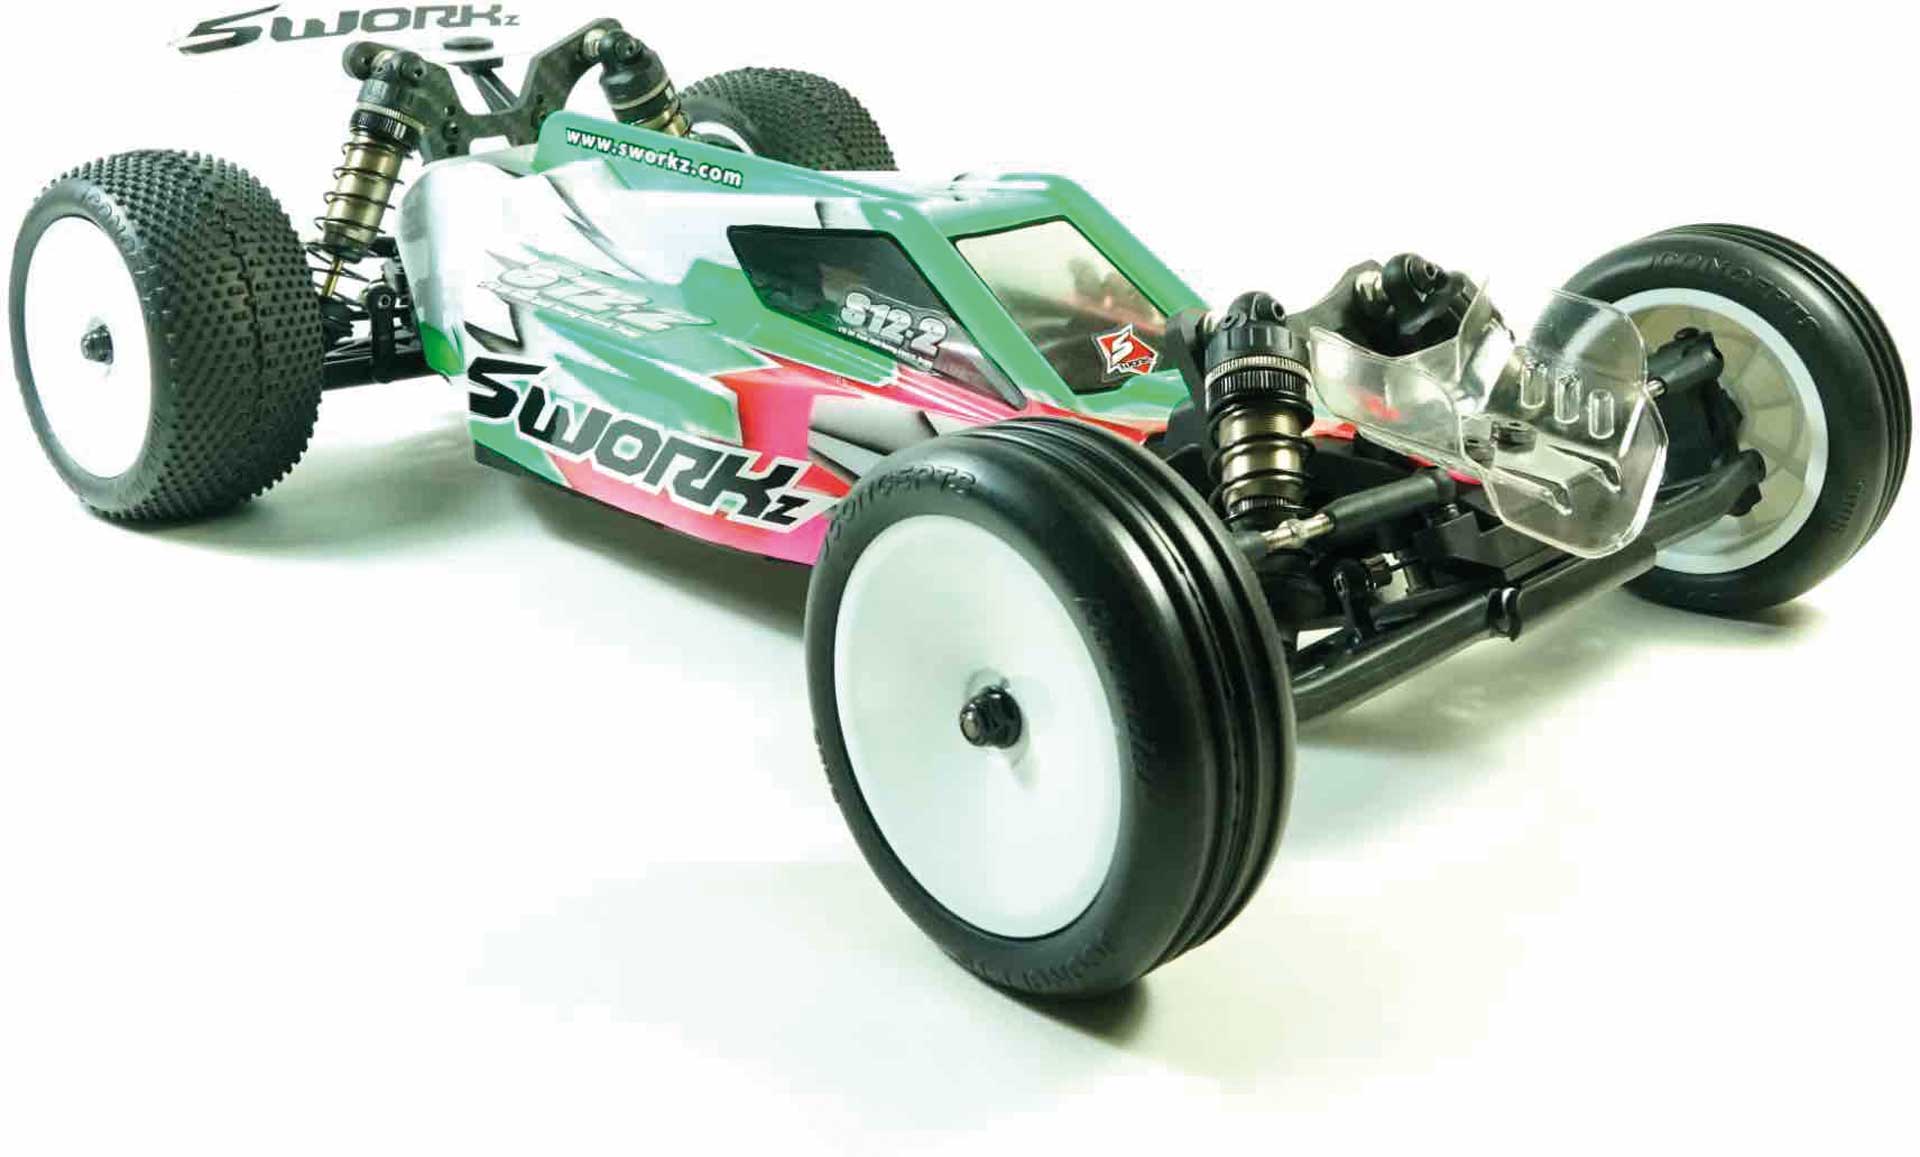 SWORKZ S12-2D(Dirt Edition) 1/10 2WD EP KIT Off Road Racing Buggy Pro